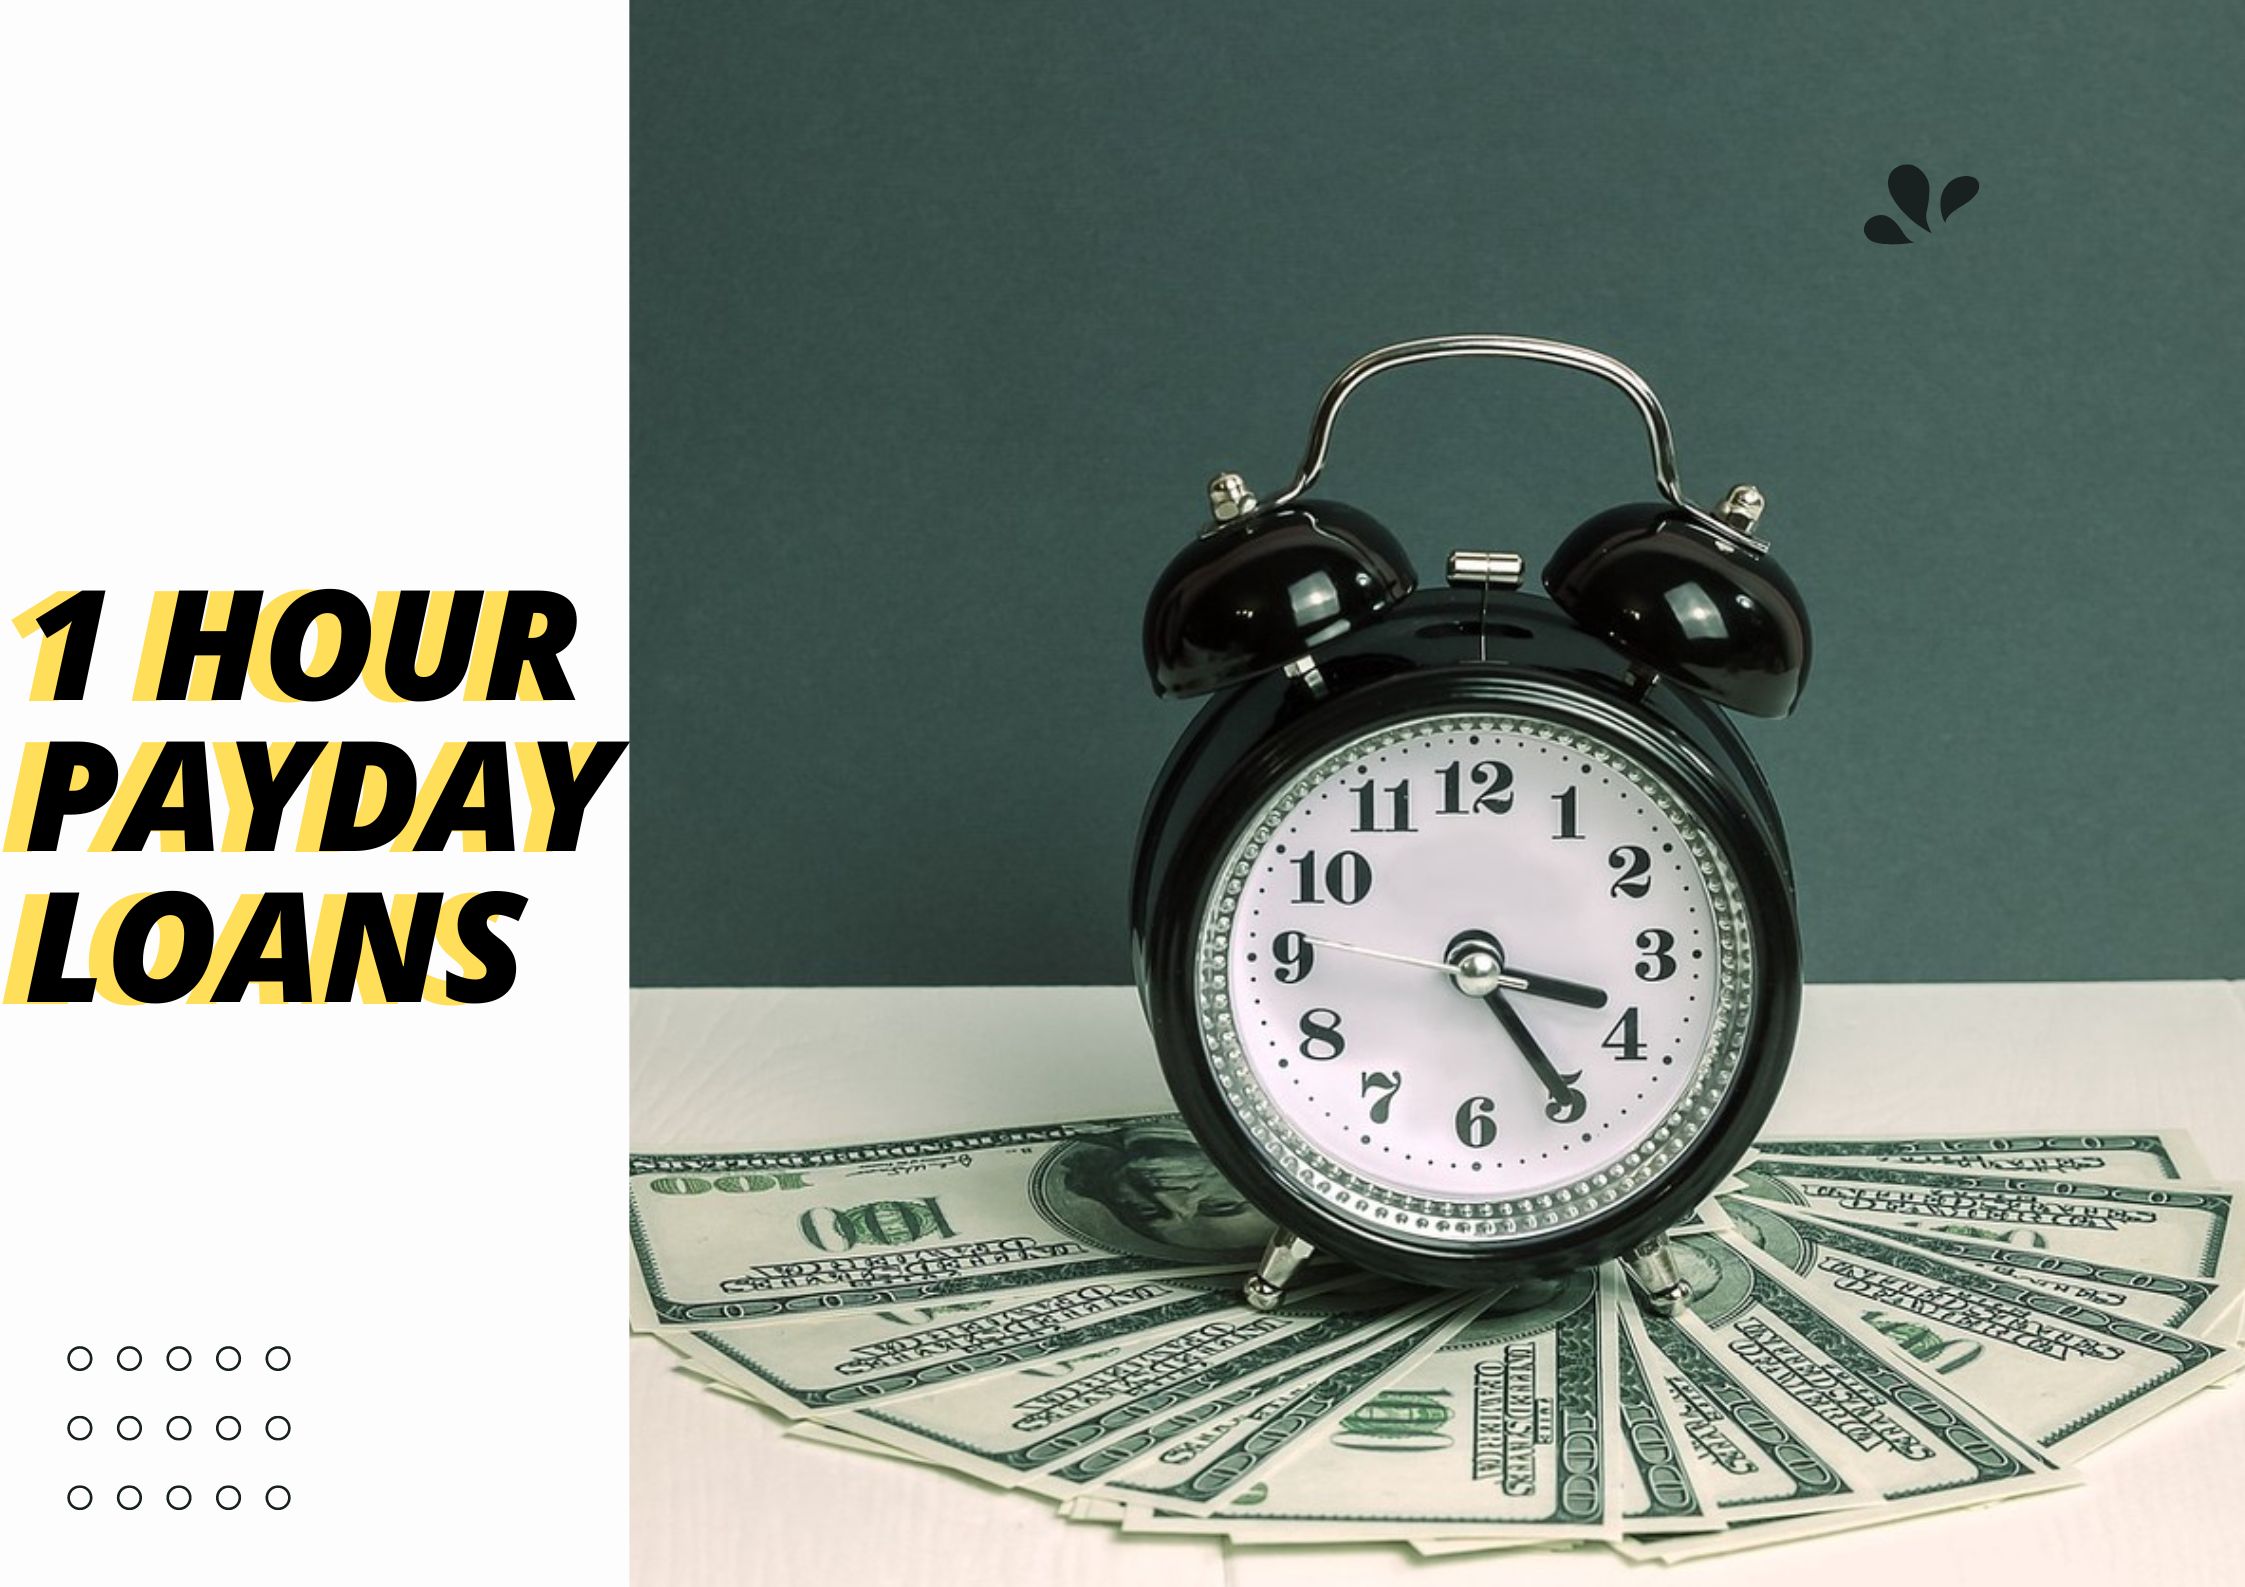 get 1 hour payday loans fast if you meet the requirements.